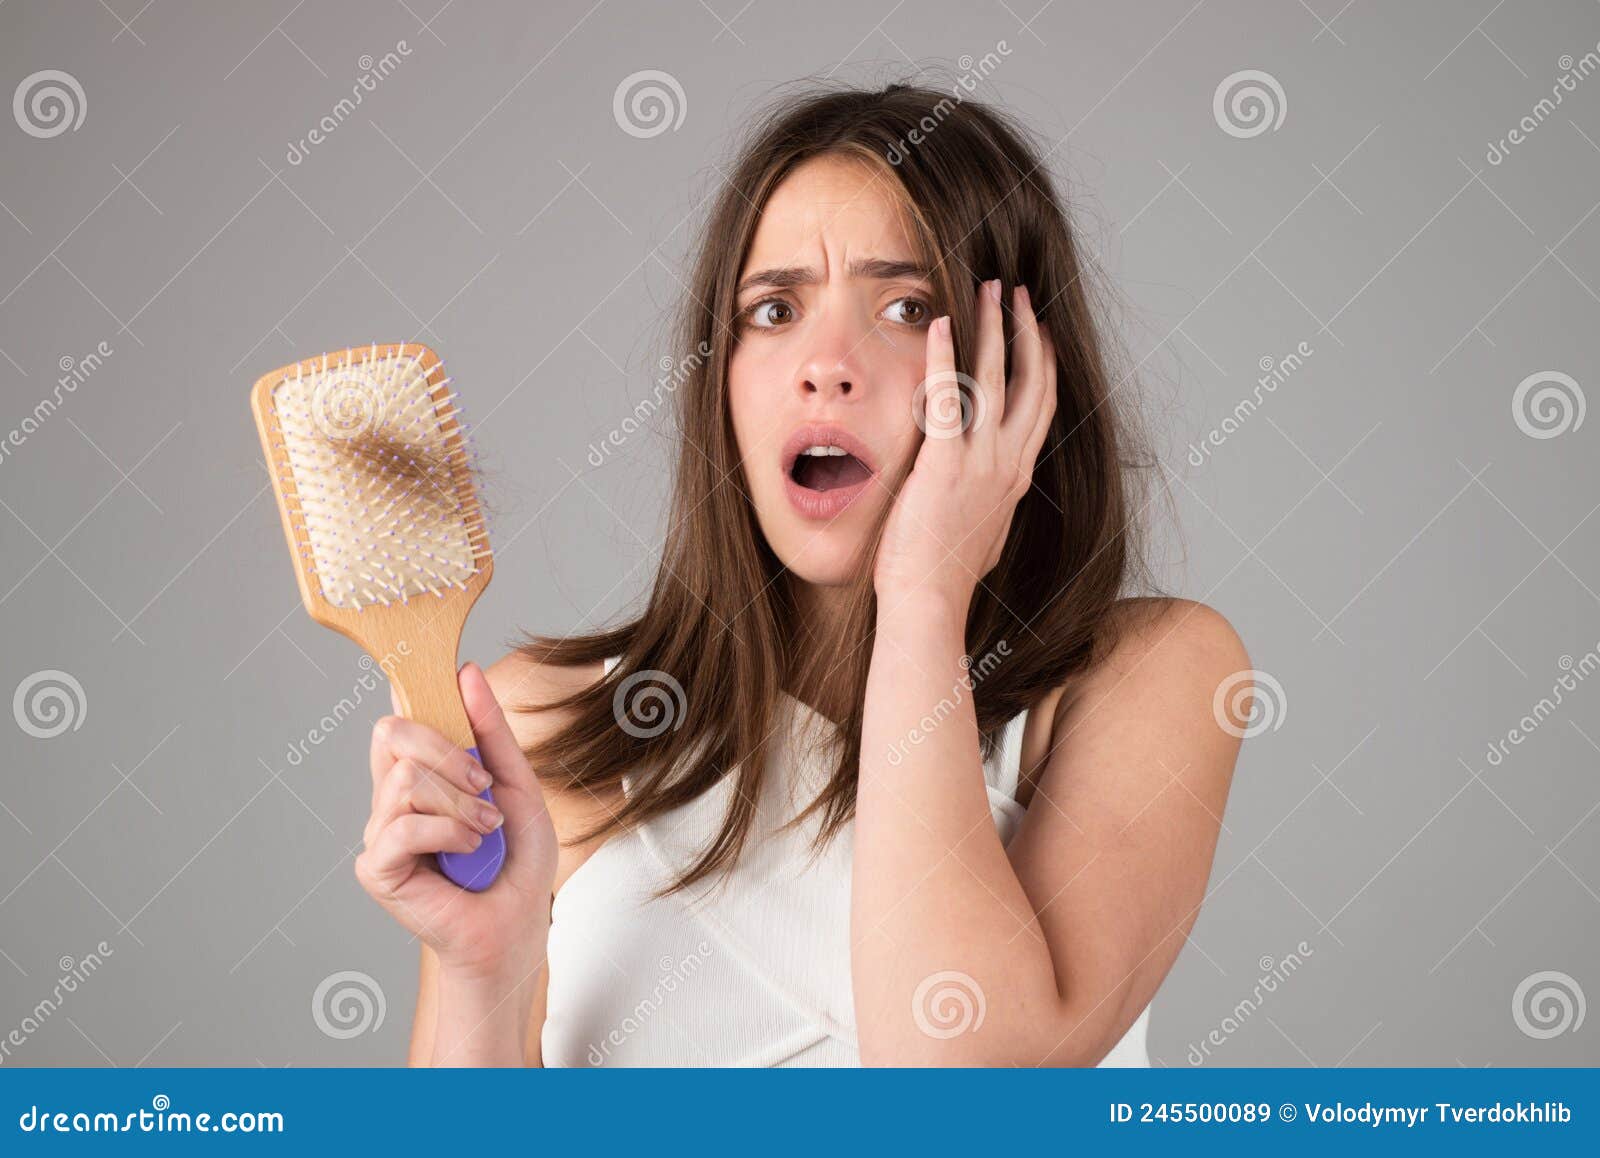 Woman with Hair Loss Problem Worried about Hair Loss. Stock Image ...